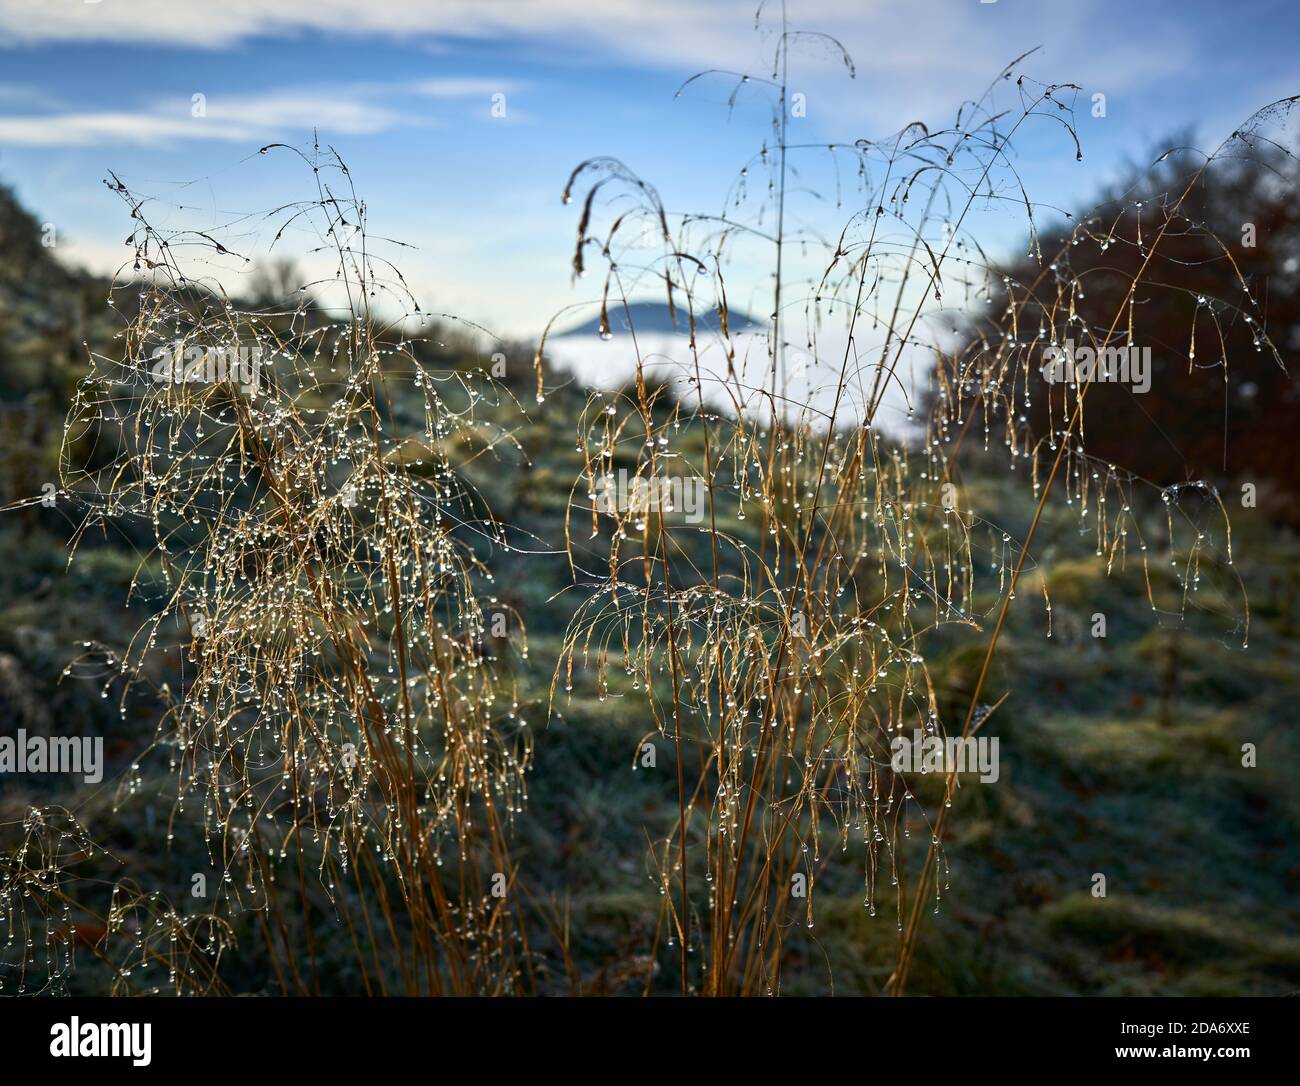 Autumn dew clings to a delicate grass, backlit by the sun with The Eildons shrouded in mist in the background. Stock Photo